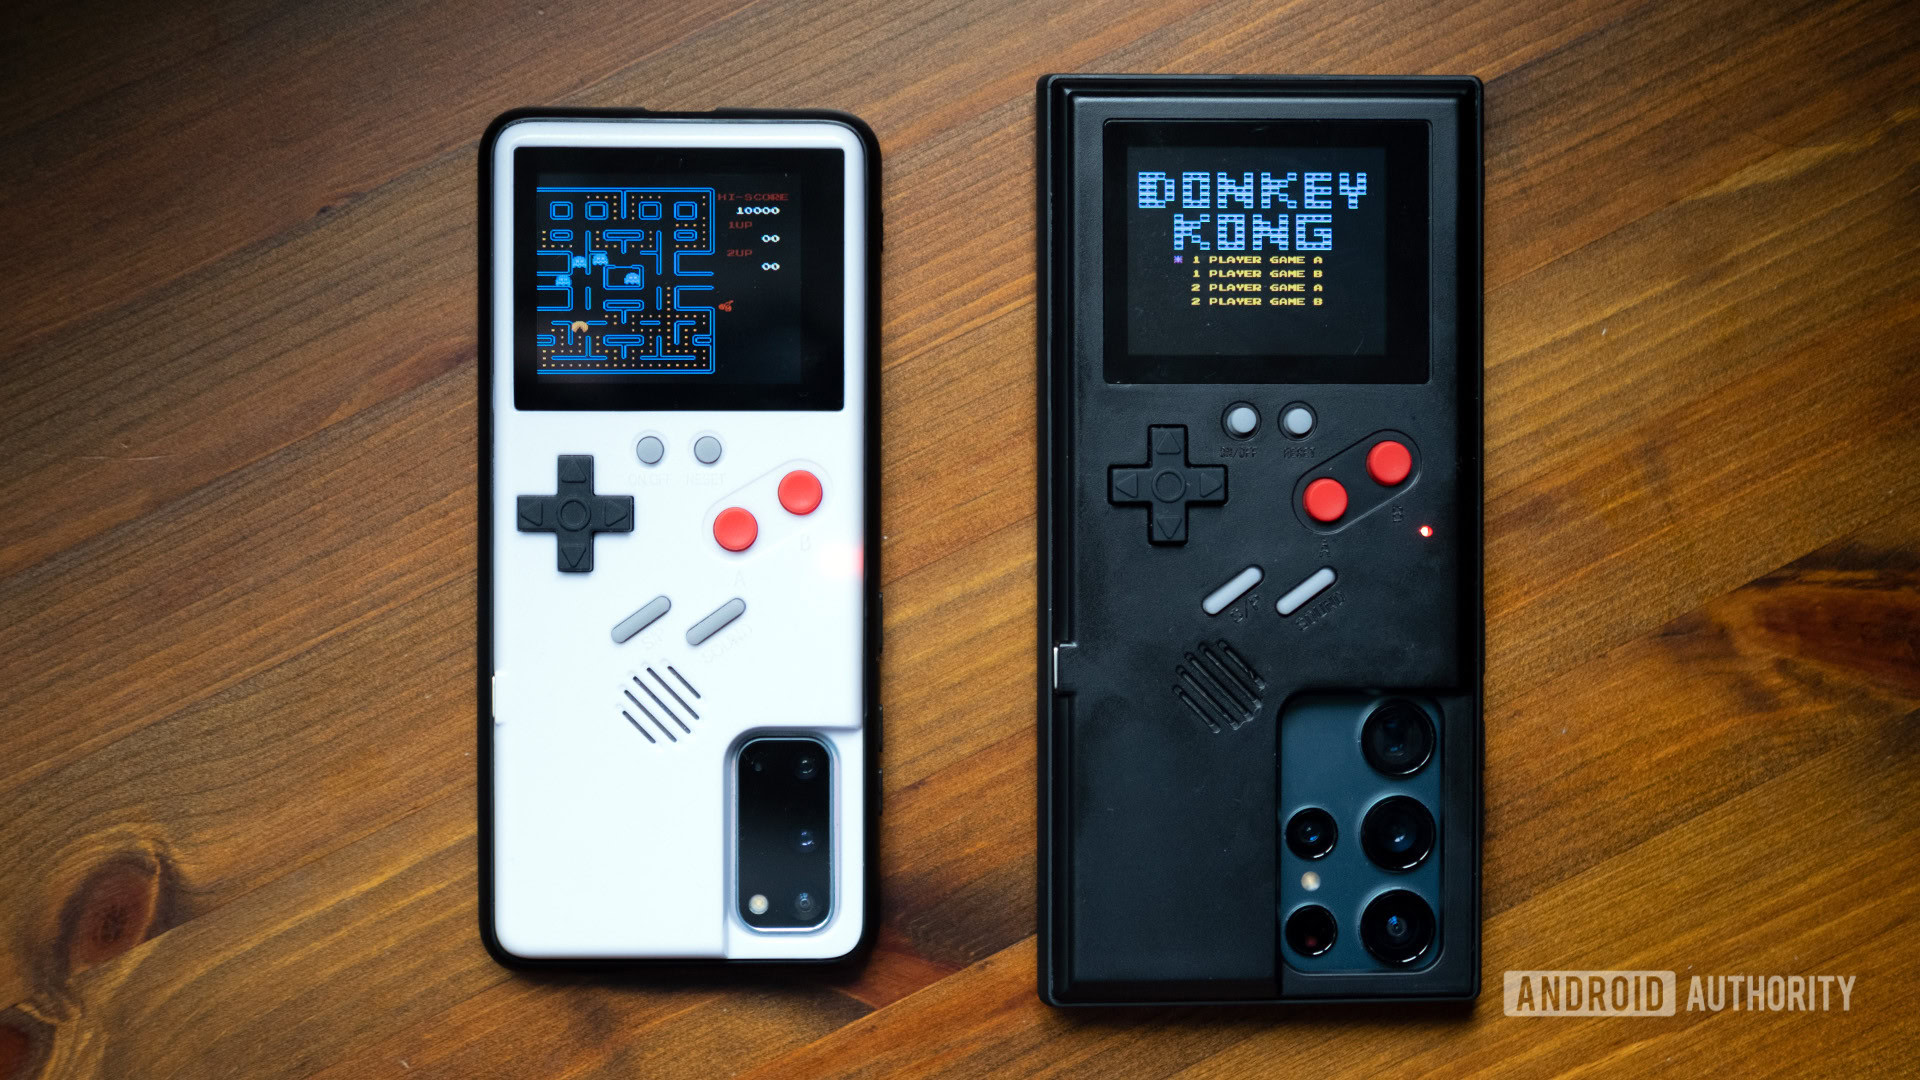 working GameBoy phone case is time and money waster